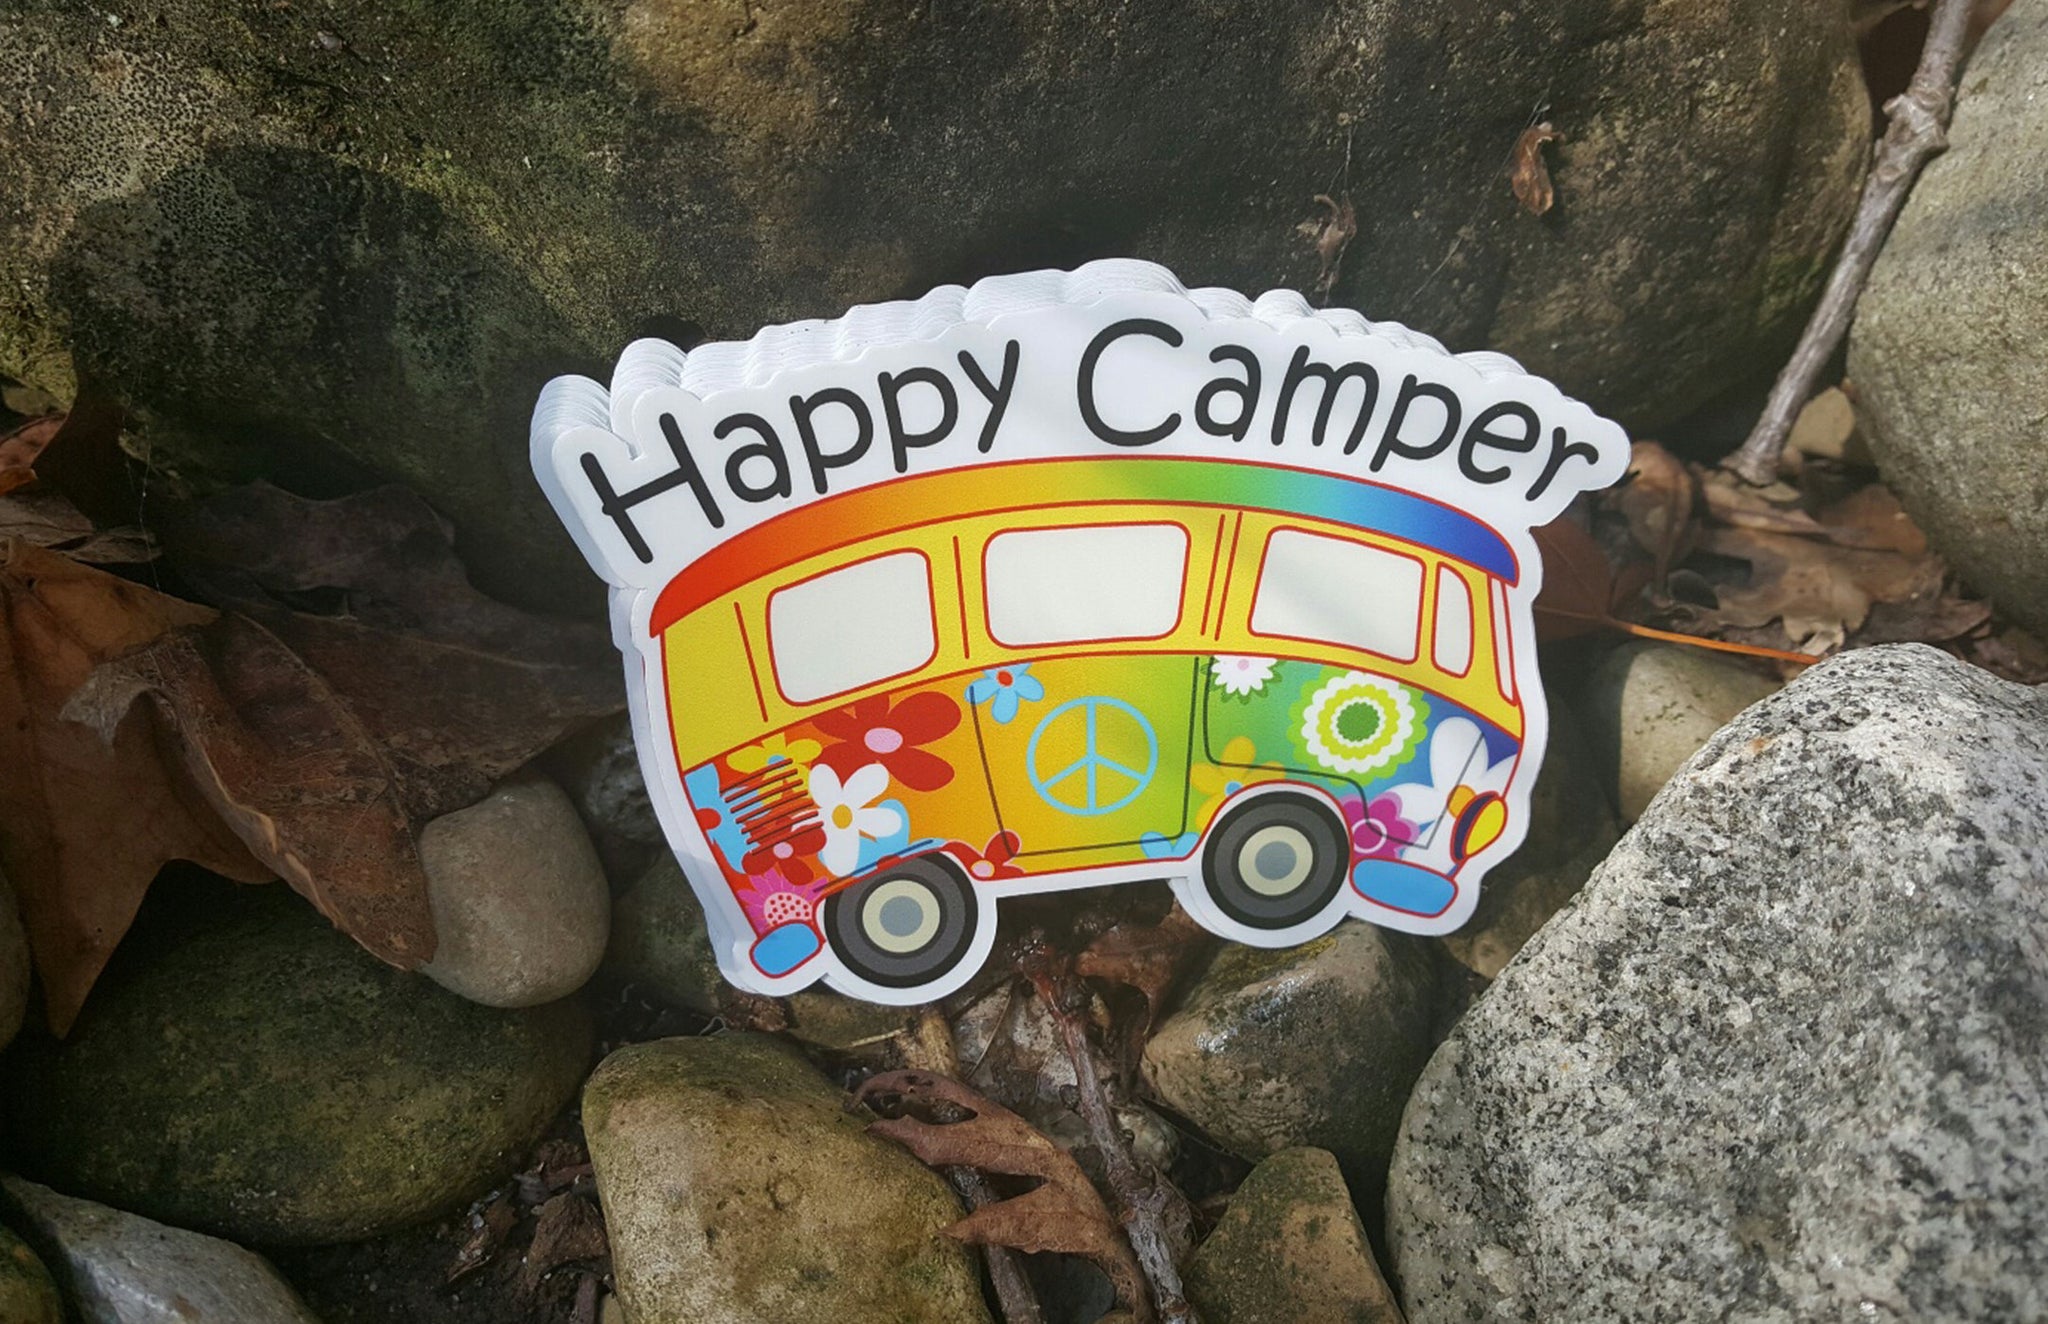 HAPPY CAMPER BUS Vinyl Sticker Bear Mountain Hiking Camping Camp Decal 4" X 2.75"